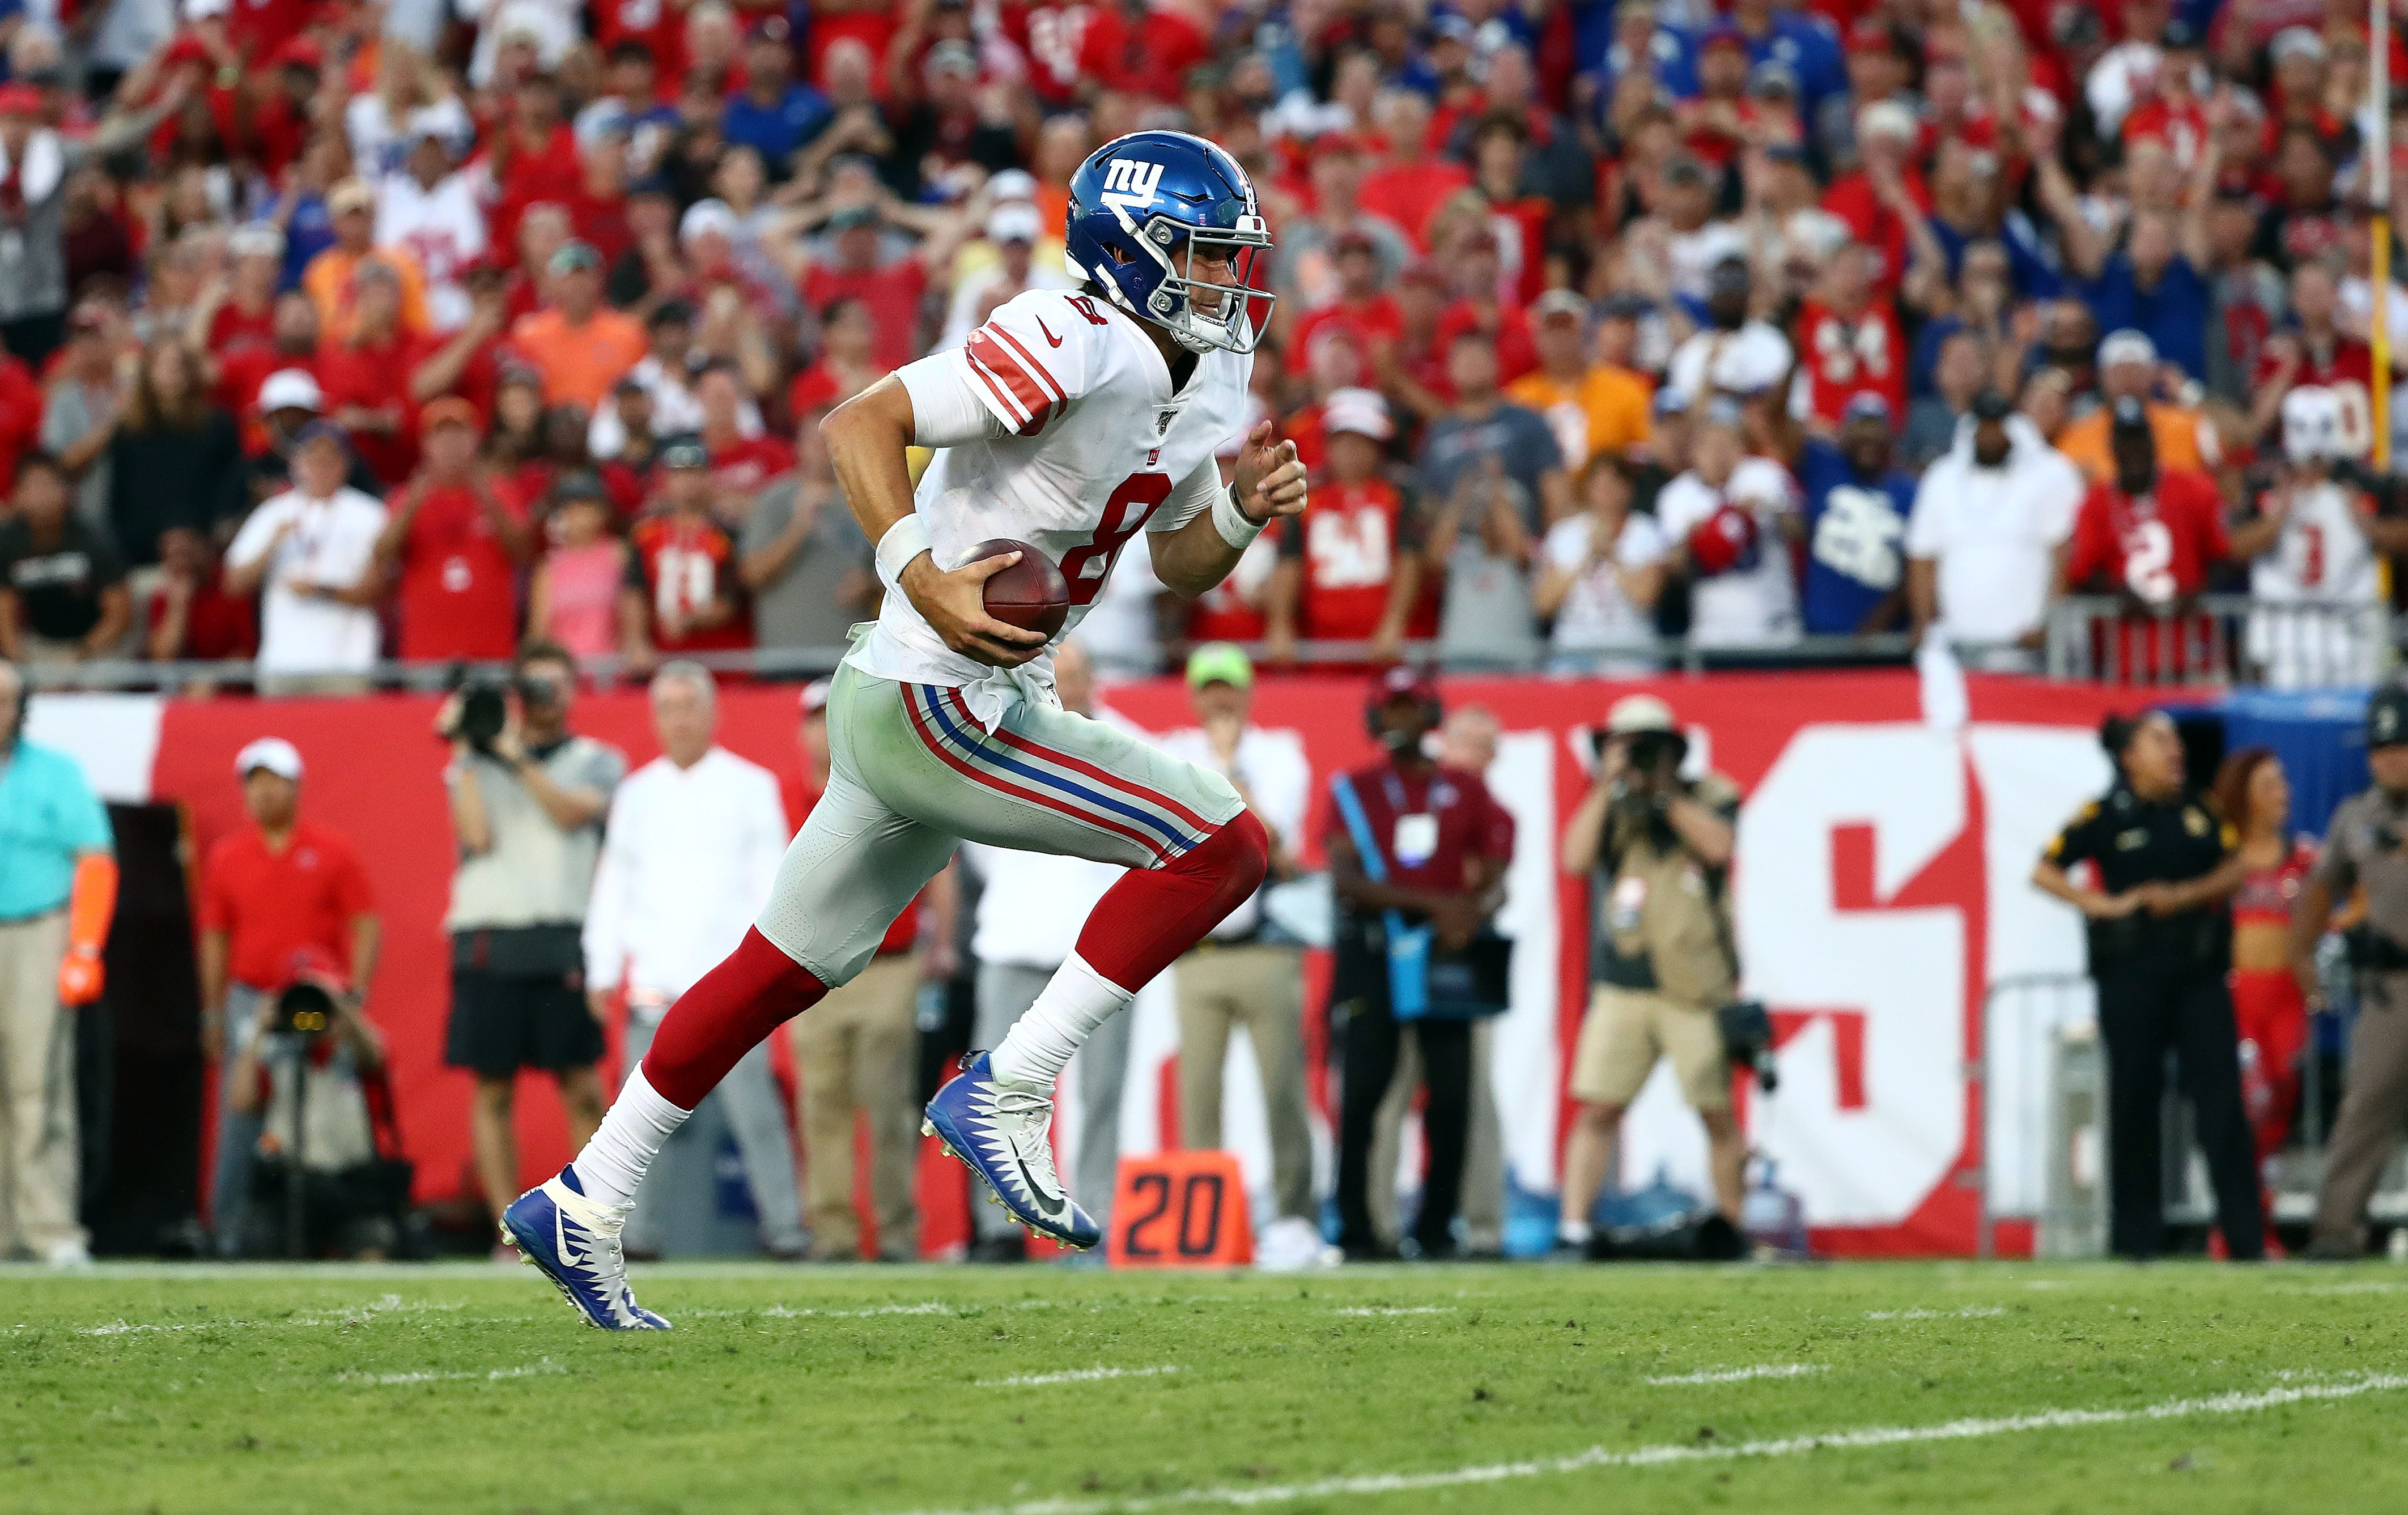 New York Giants Just how fast was Daniel Jones on his two rushing